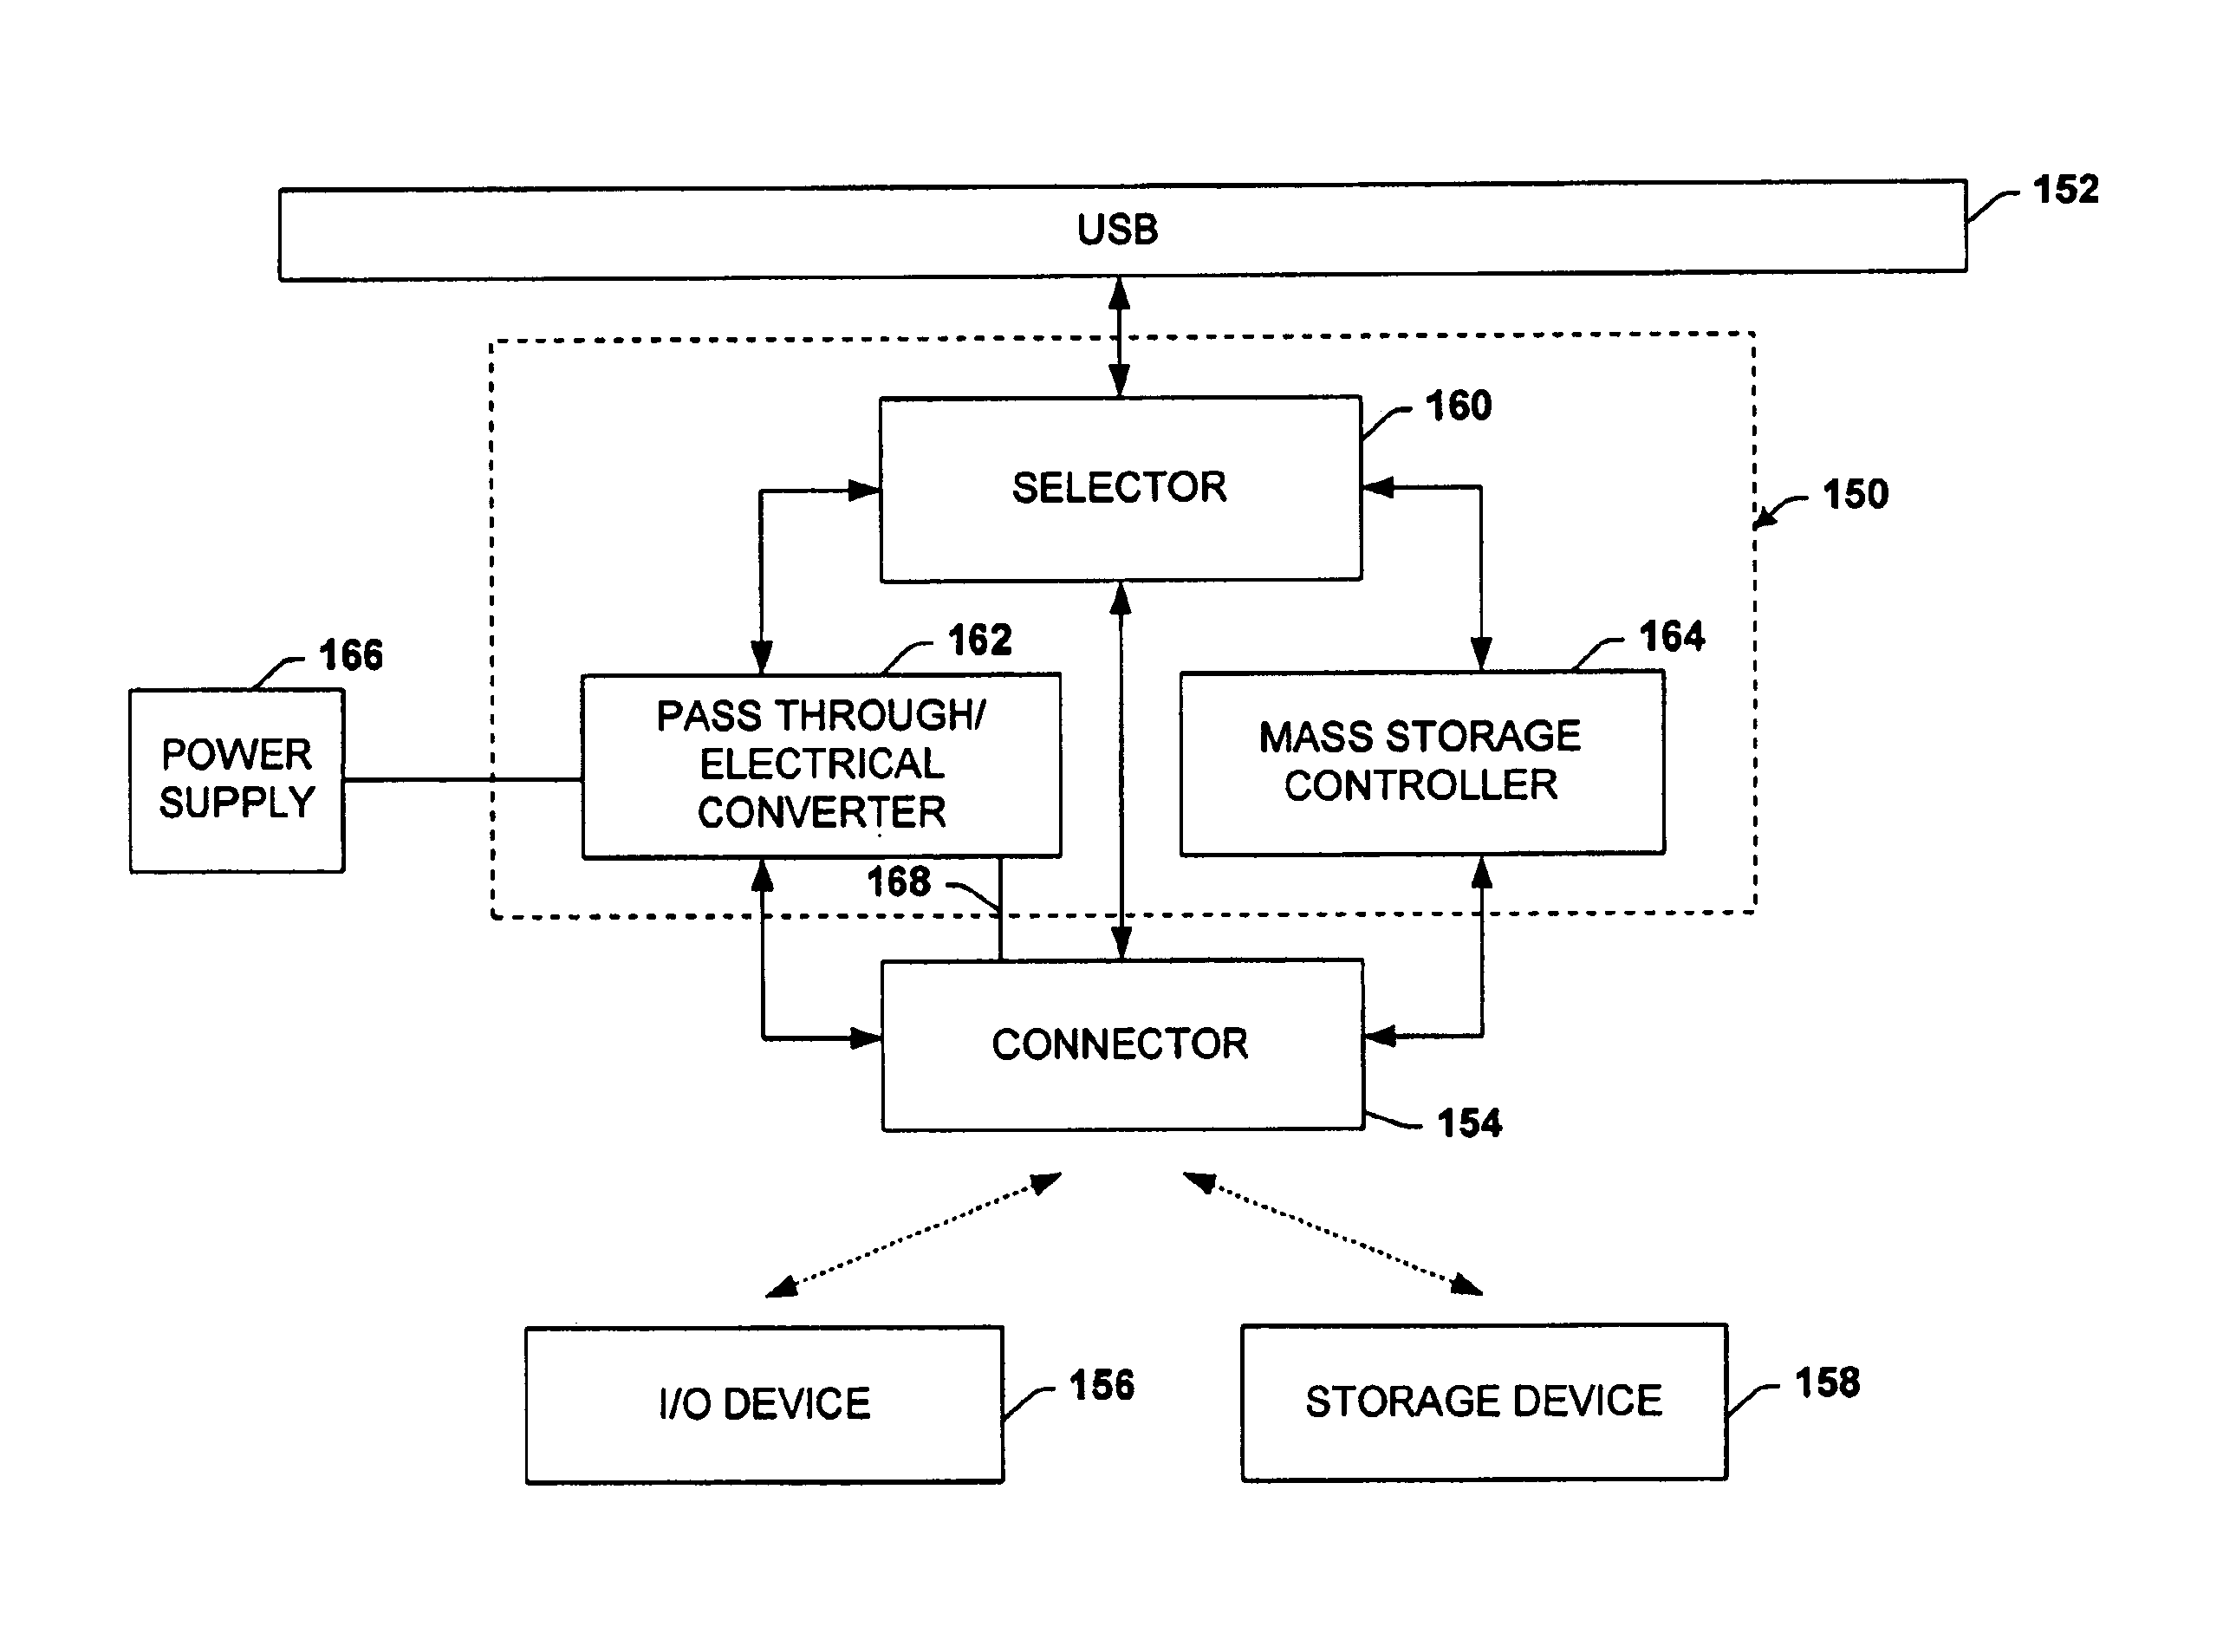 System and method to facilitate native use of small form factor devices